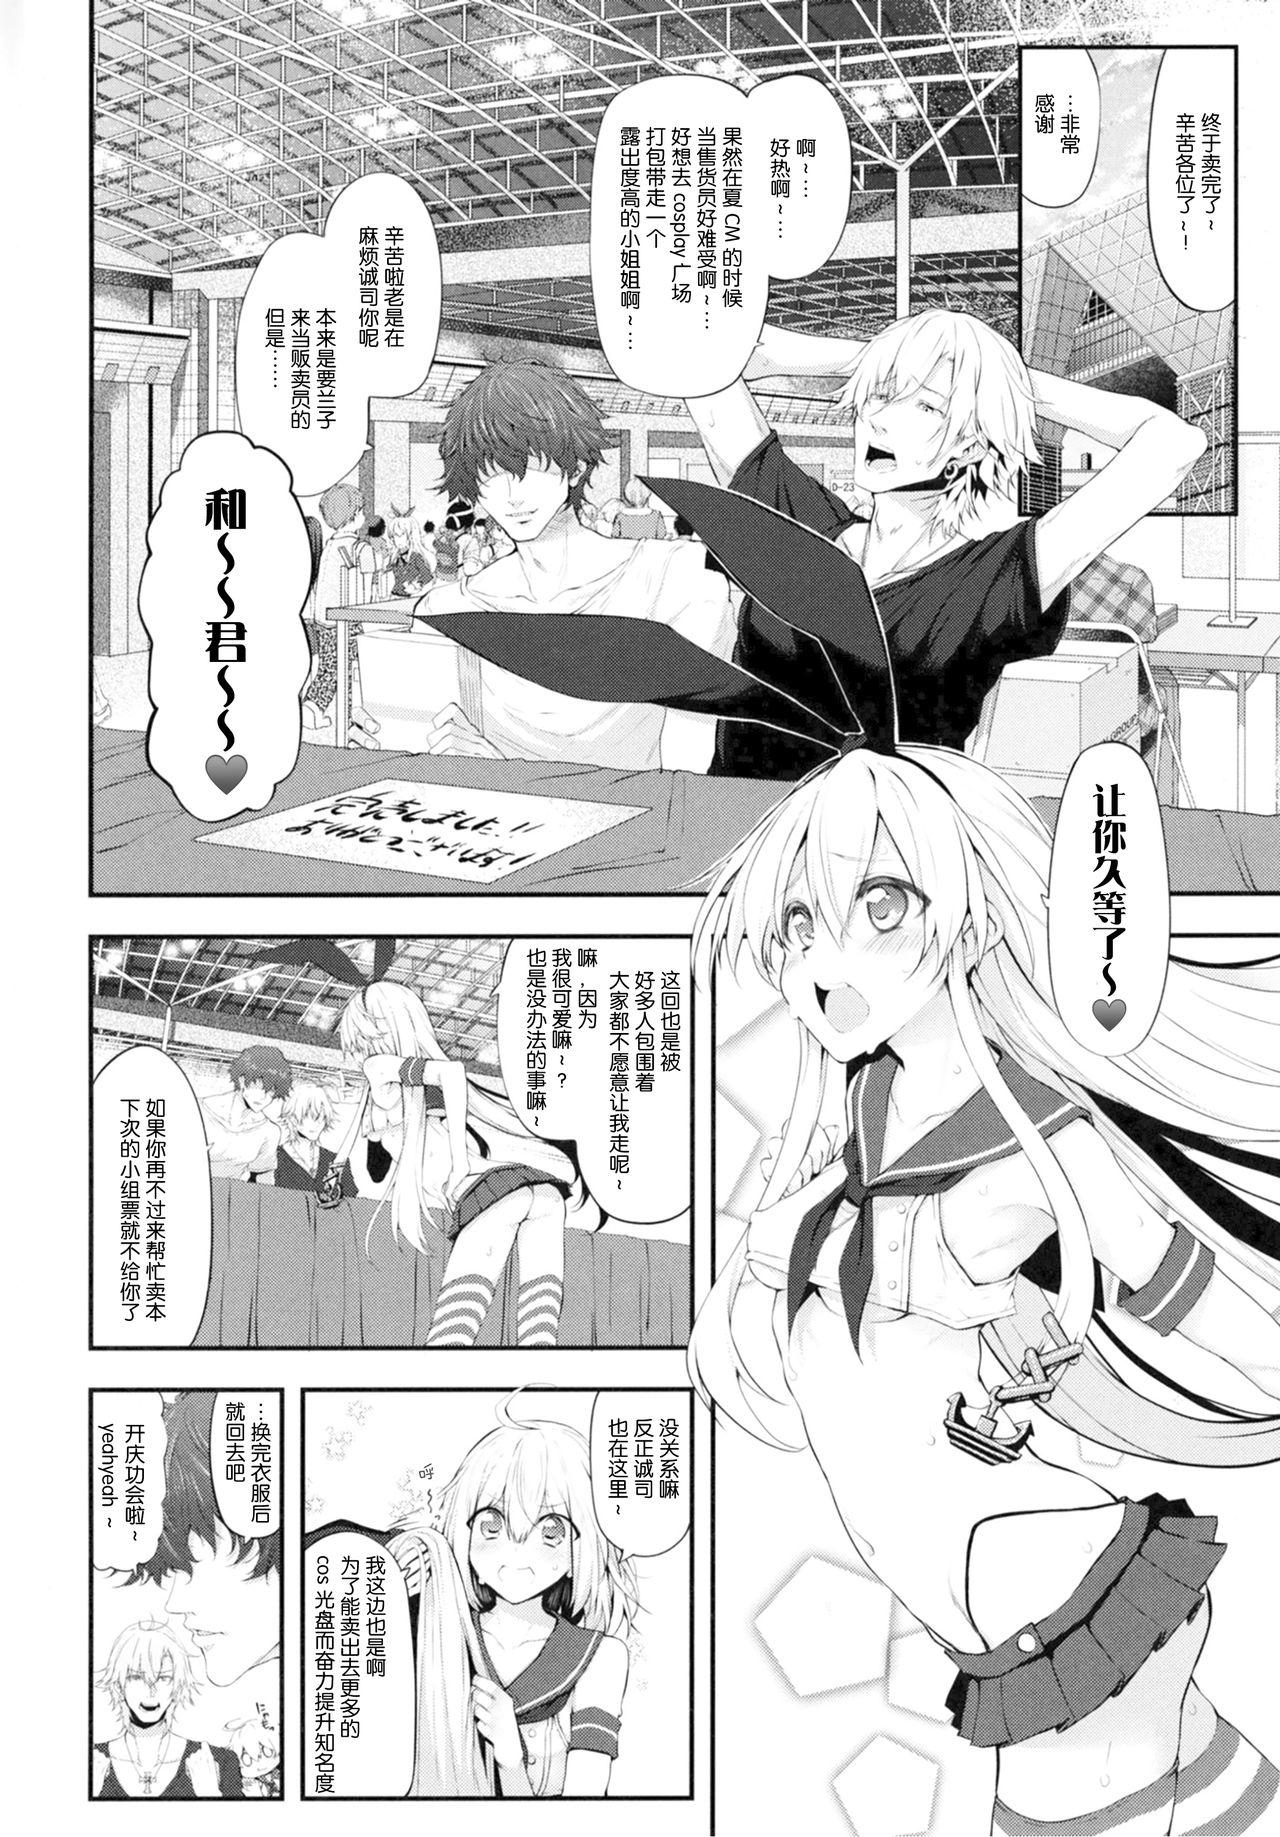 Bald Pussy COSBITCH! Marked-girls Origin Vol. 1 - Kantai collection Animated - Page 4